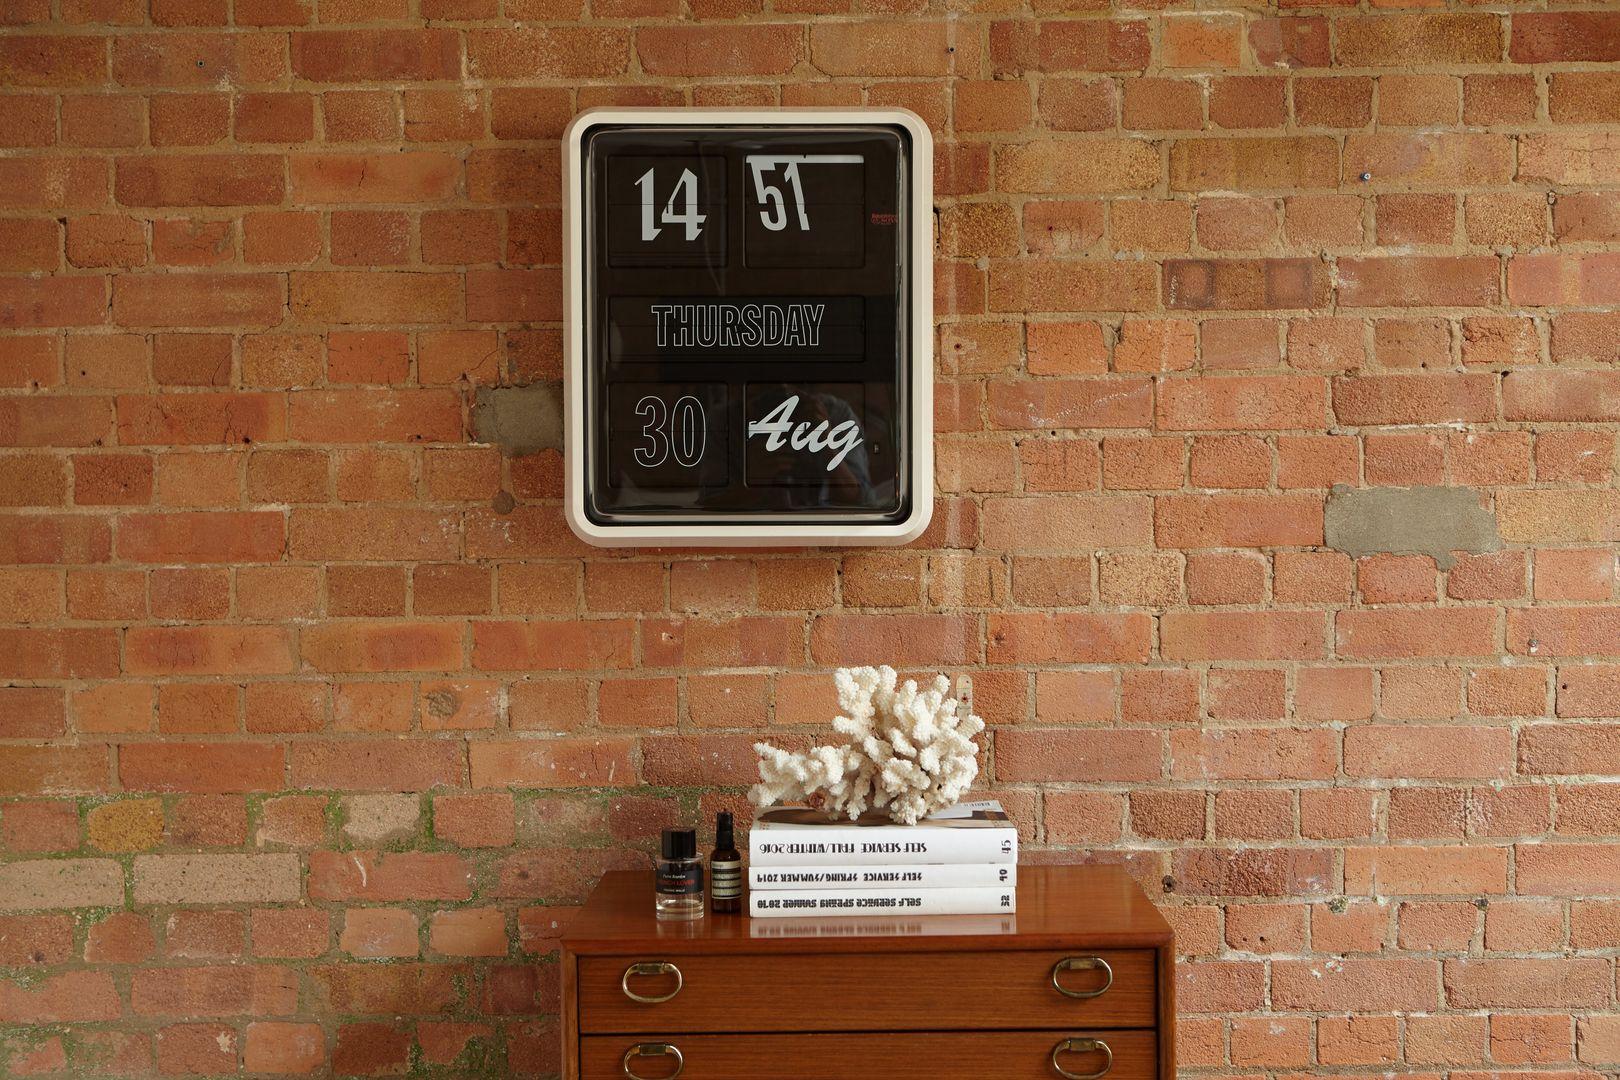 An instant design icon, Sebastian Wrong’s Font Clock features an ever-changing display that uses twelve different type faces and a flip mechanism in a design that is both nostalgic and contemporary.

The iconic calendar clock, with its distinctive